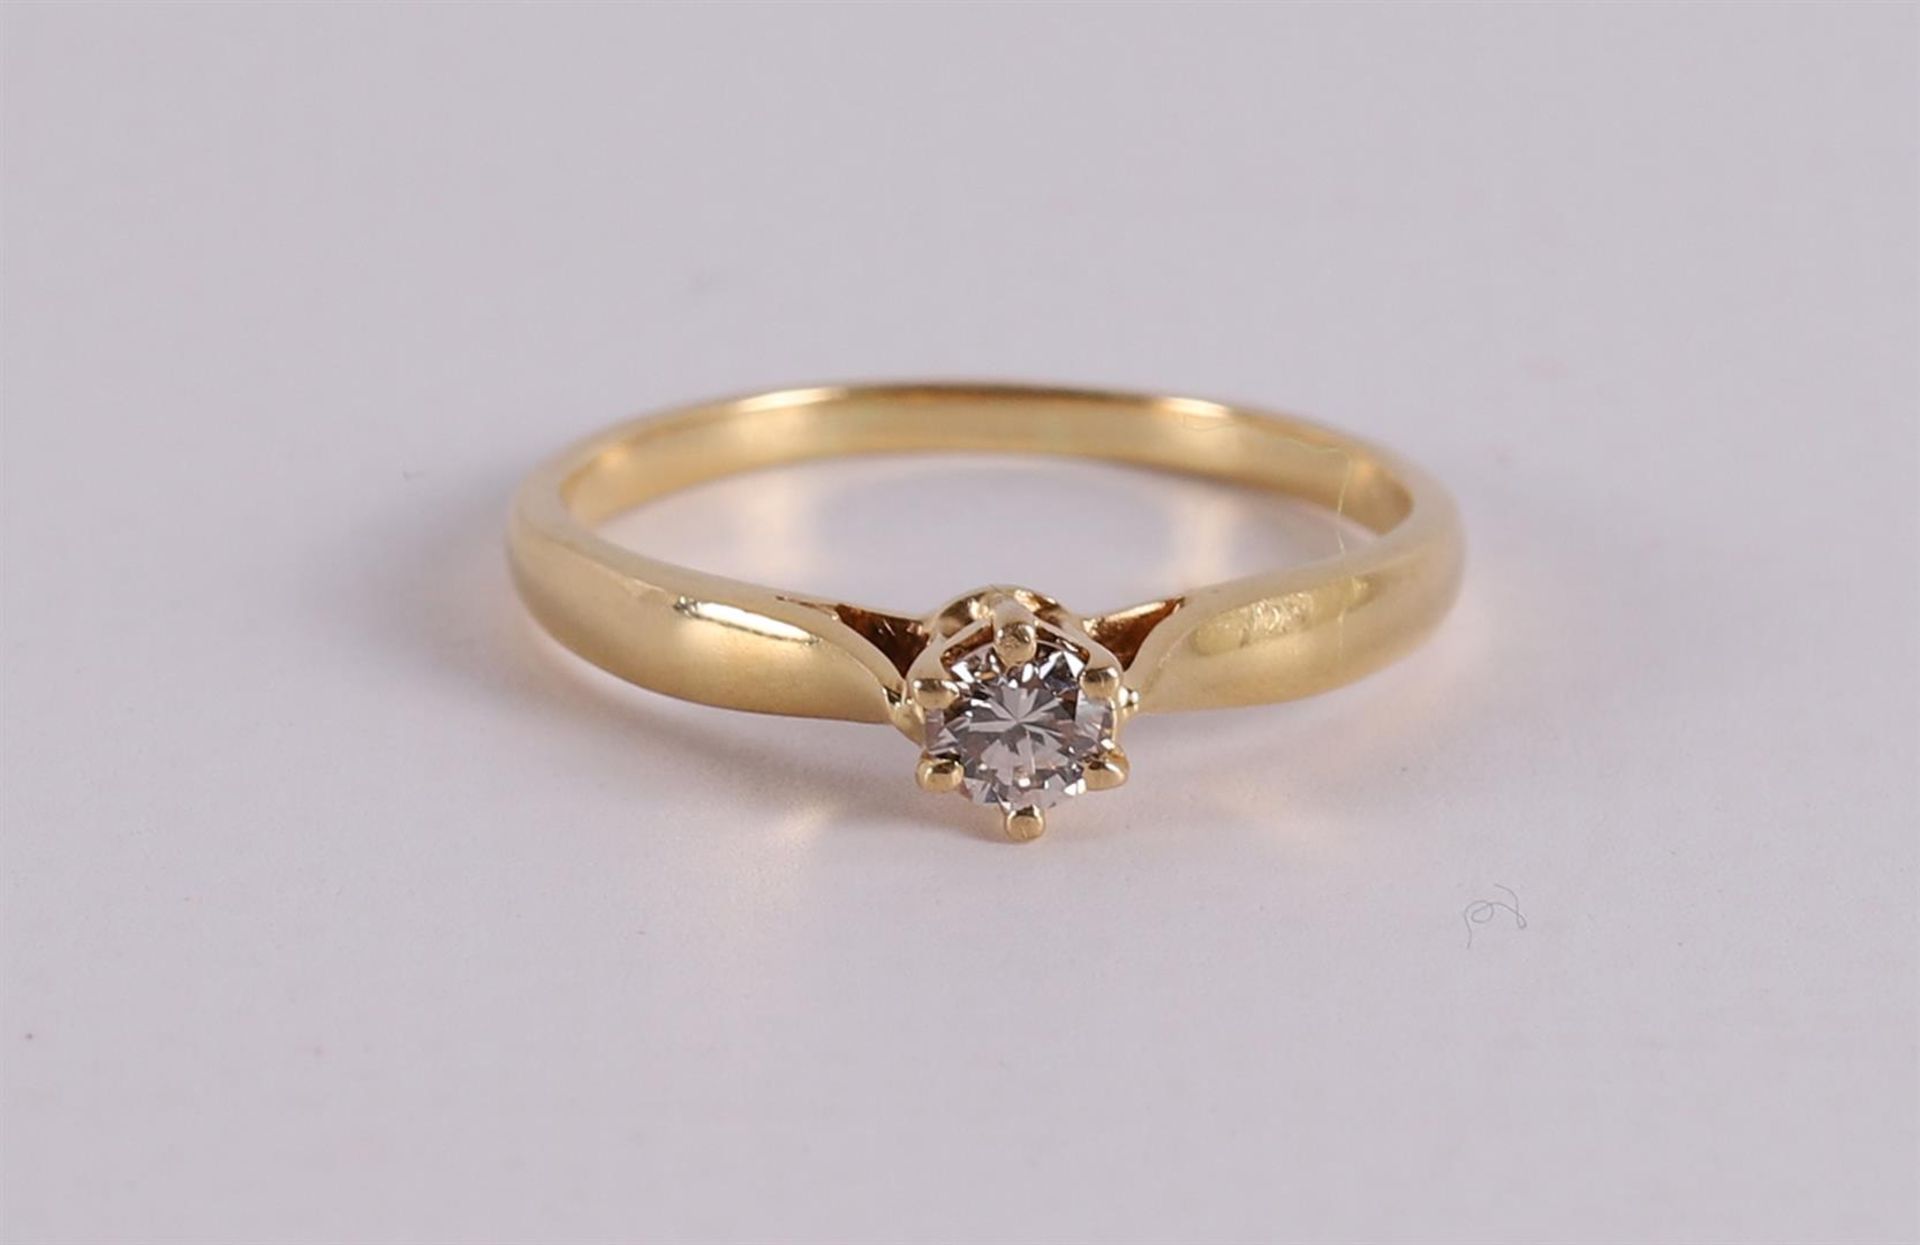 An 18 kt gold solitaire ring with a brilliant .